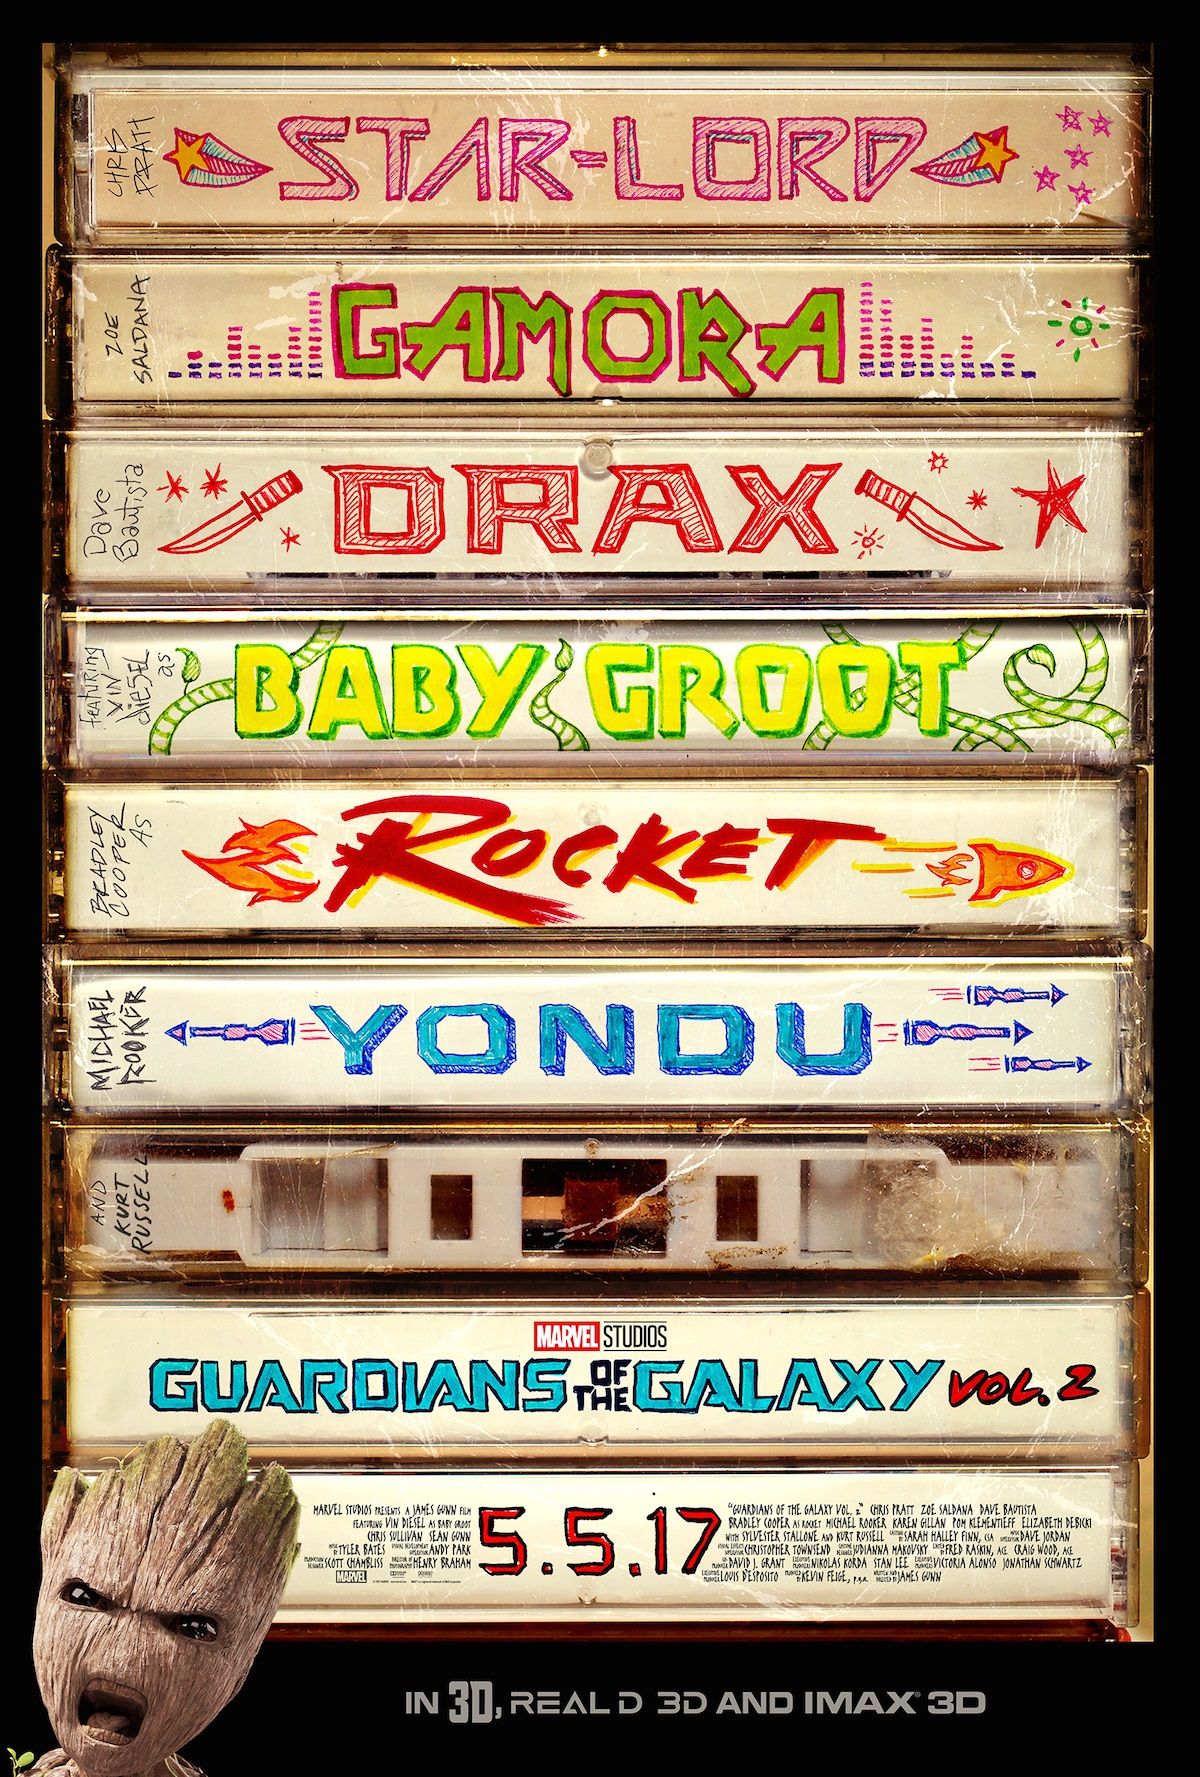 Guardians of the Galaxy Vol 2 - One Sheet Poster